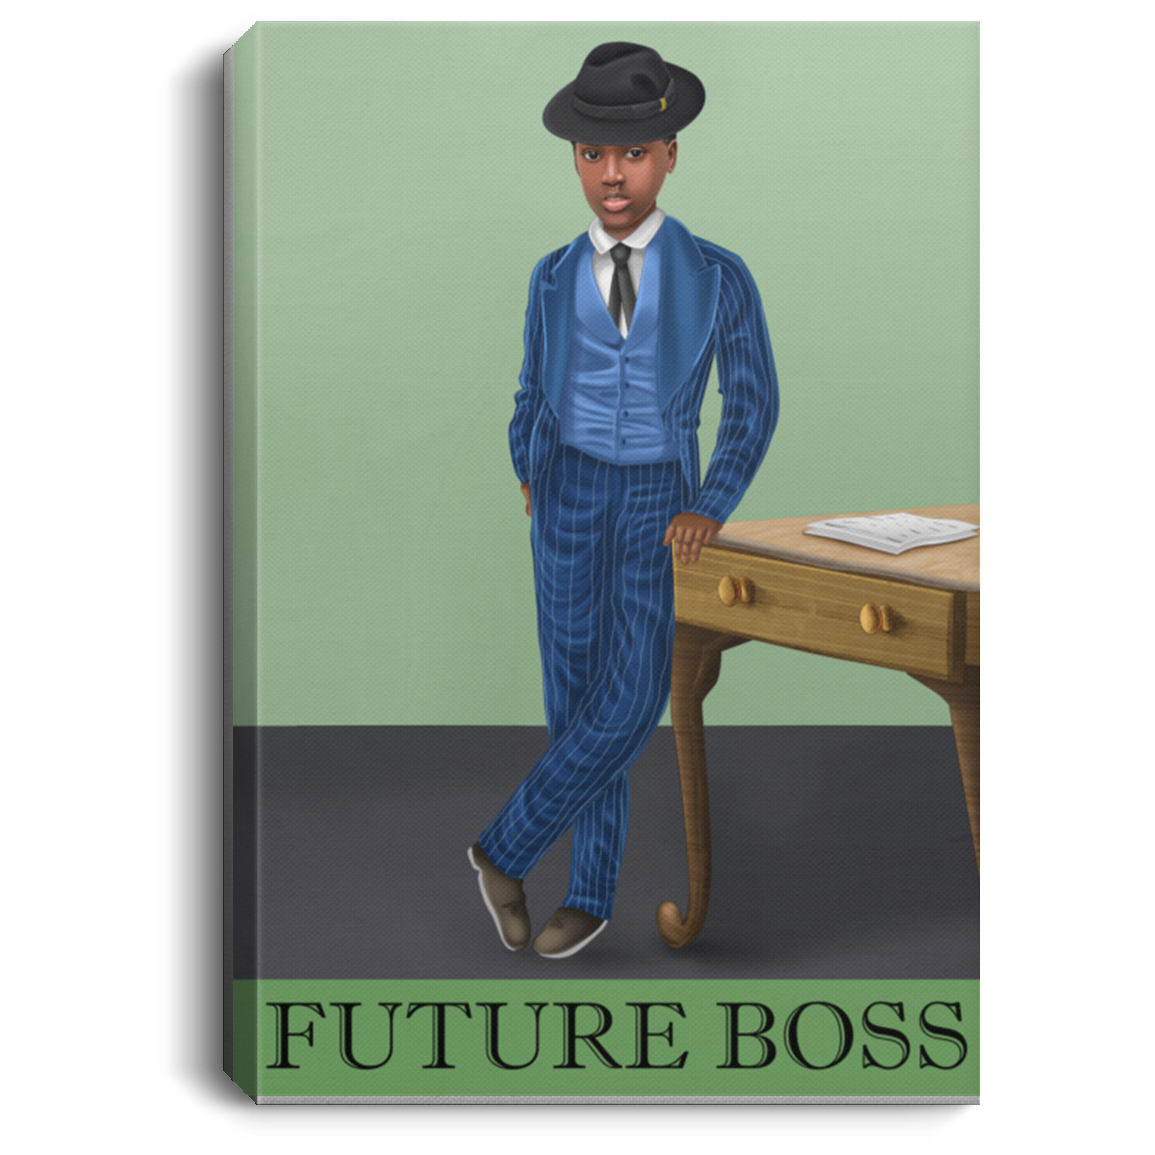 Future Boss w/Text by Crowned Us